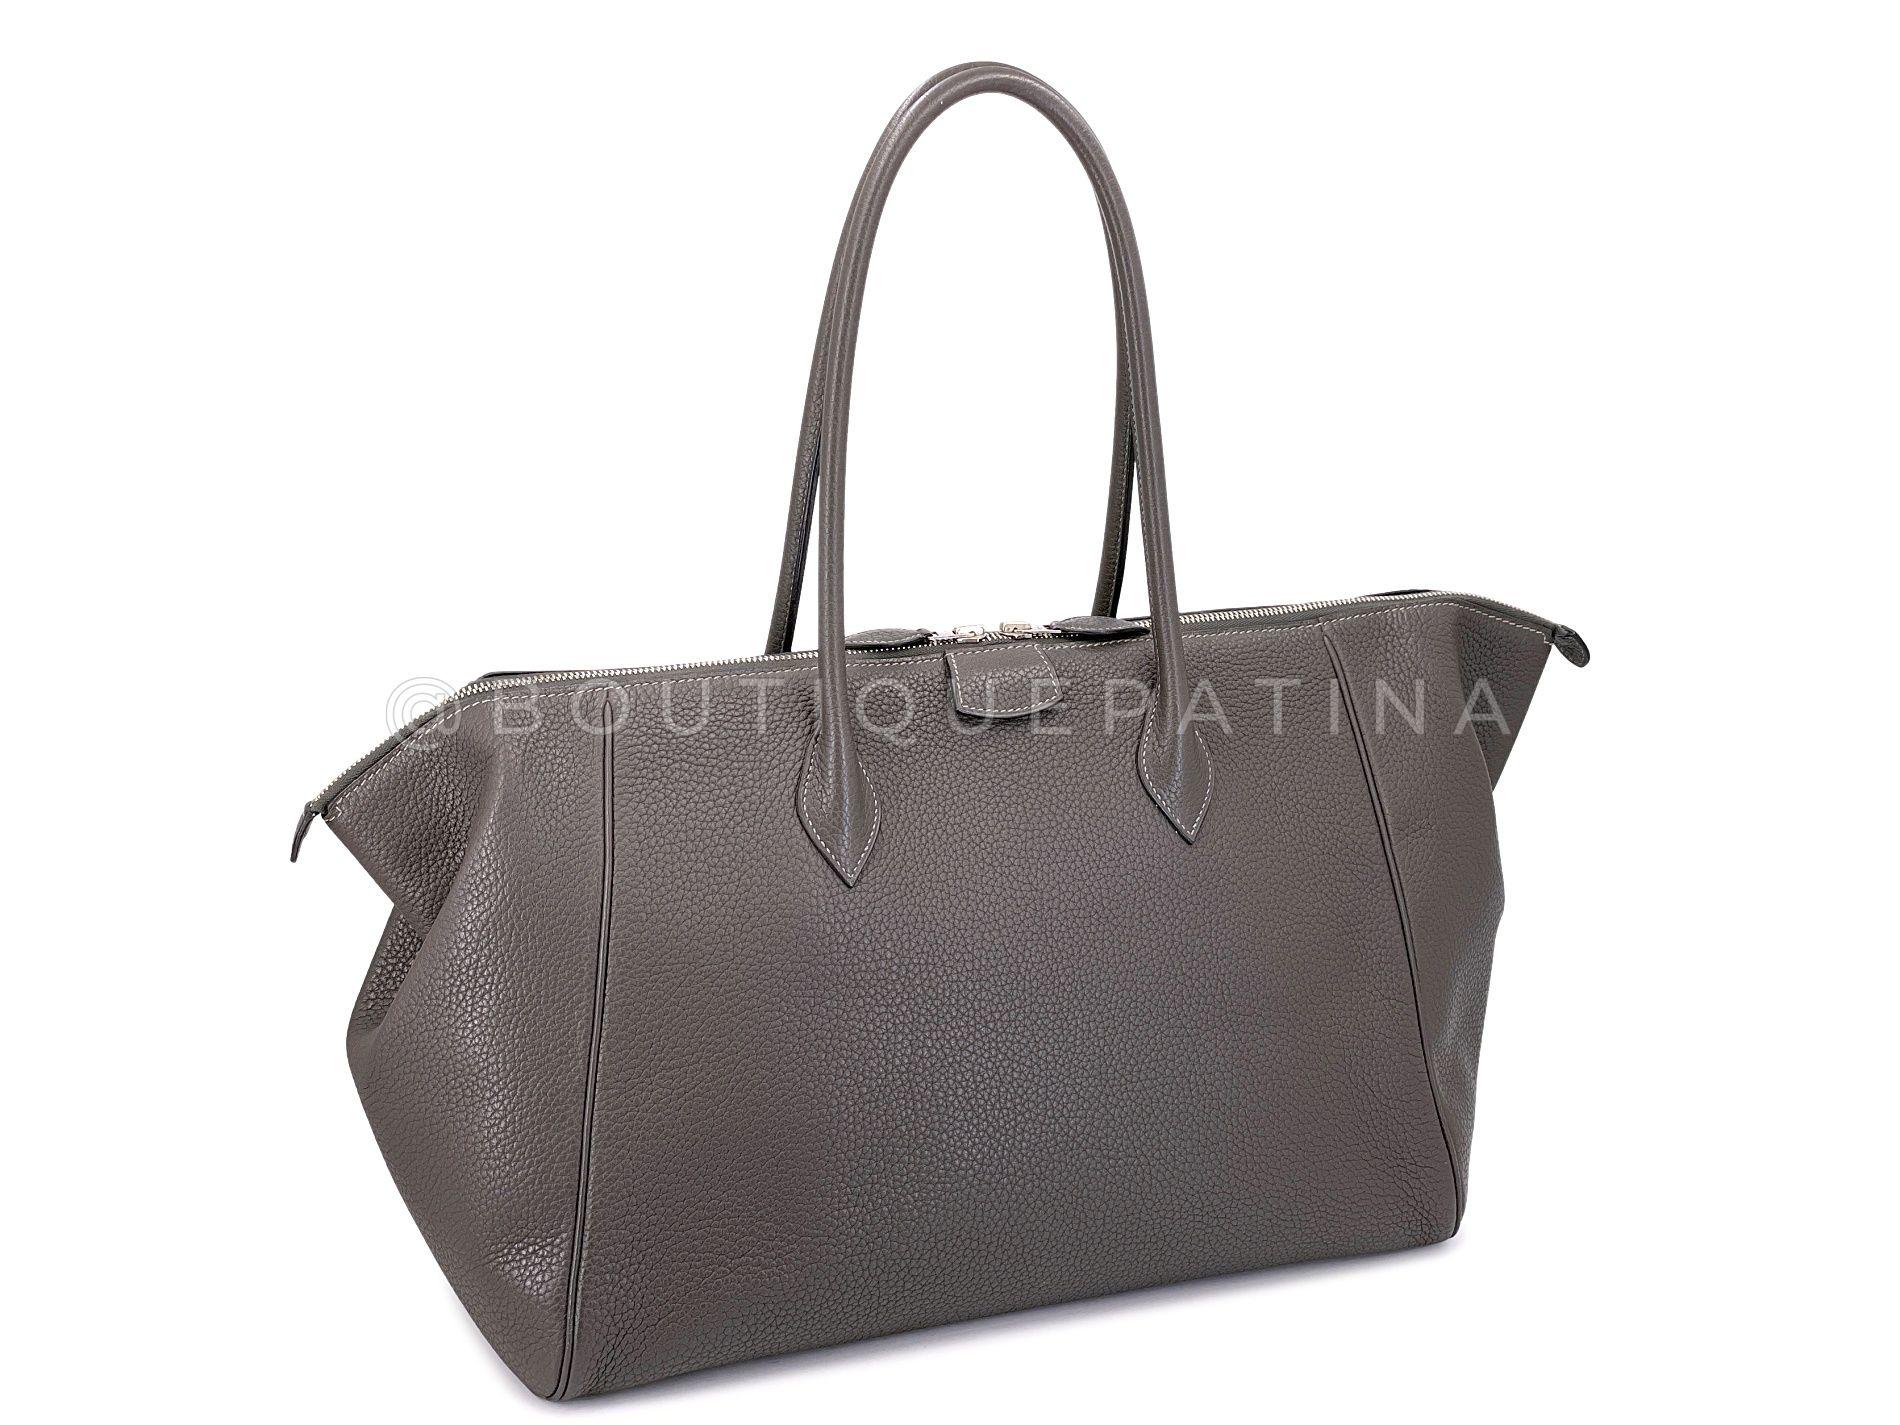 Hermès Etoupe Clemence Paris Bombay 37 Tote Bag PHW Taupe 68061 In Excellent Condition For Sale In Costa Mesa, CA